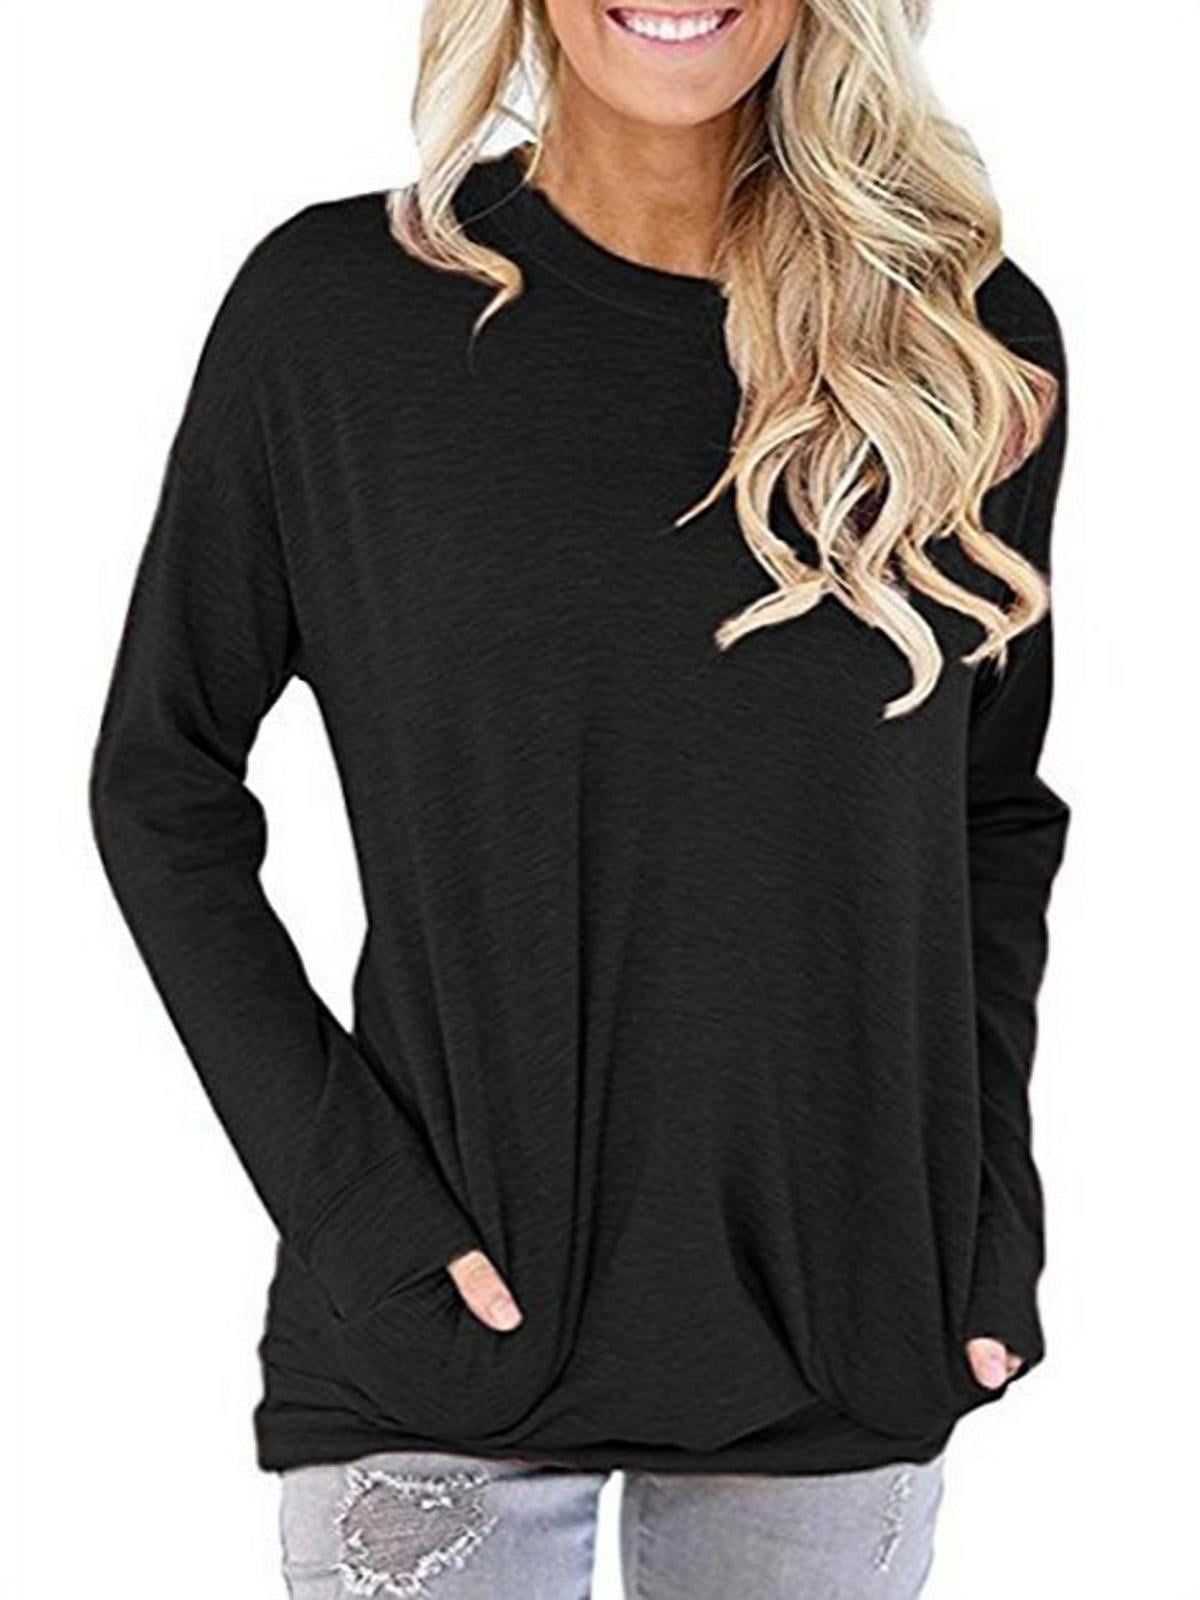 Women Long T Shirt Dress,Ladies Casual Solid Short Sleeve Hooded Sweatshirt Pocket Tops Home Clothes 